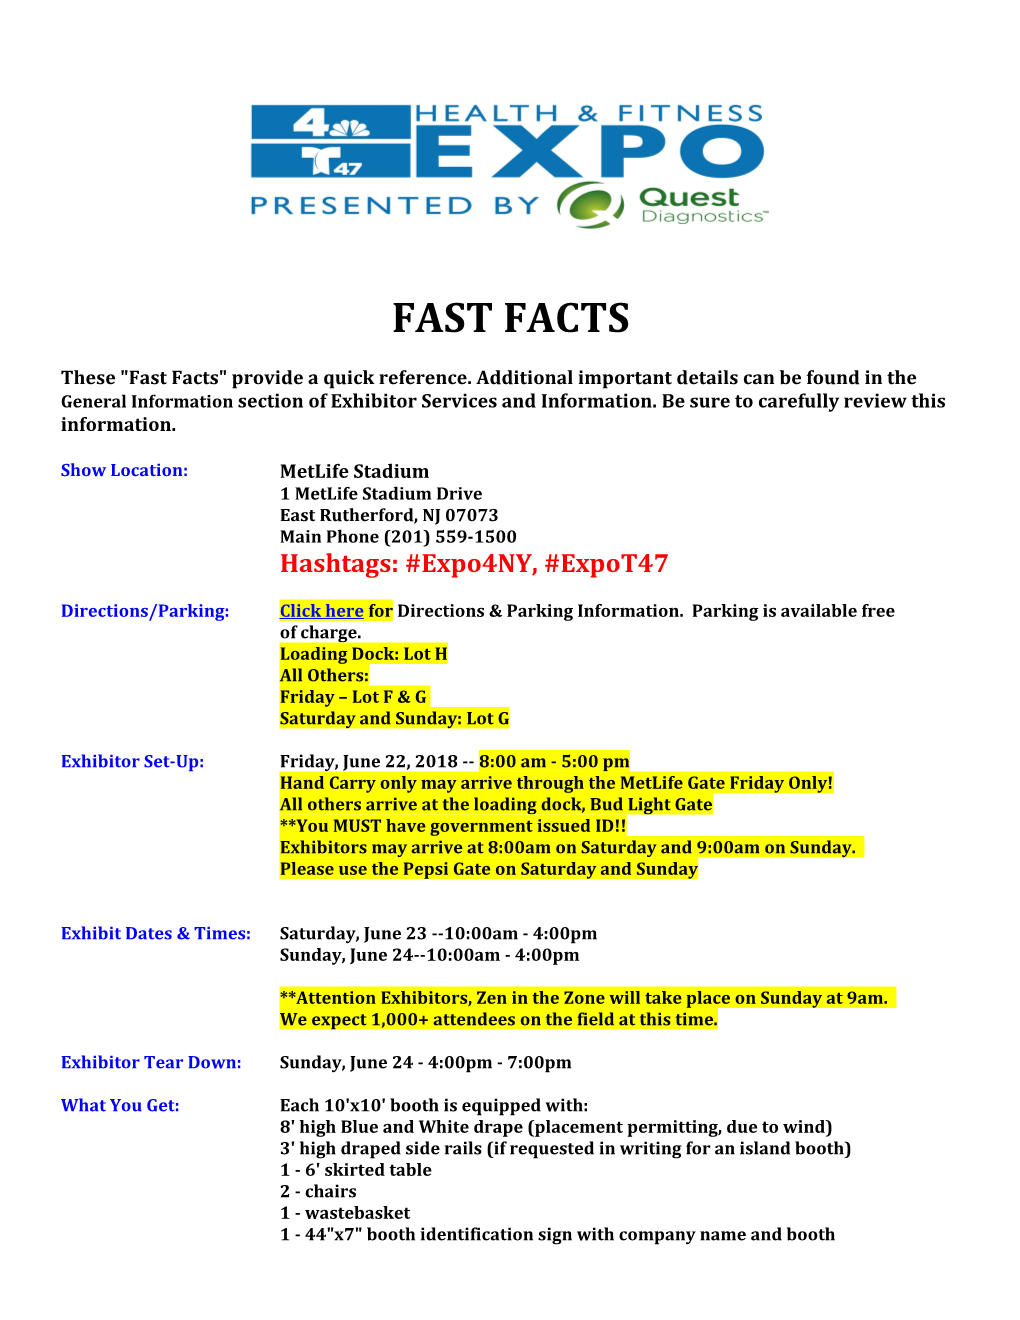 These Fast Facts Provide a Quick Reference. Additional Important Details Can Be Found